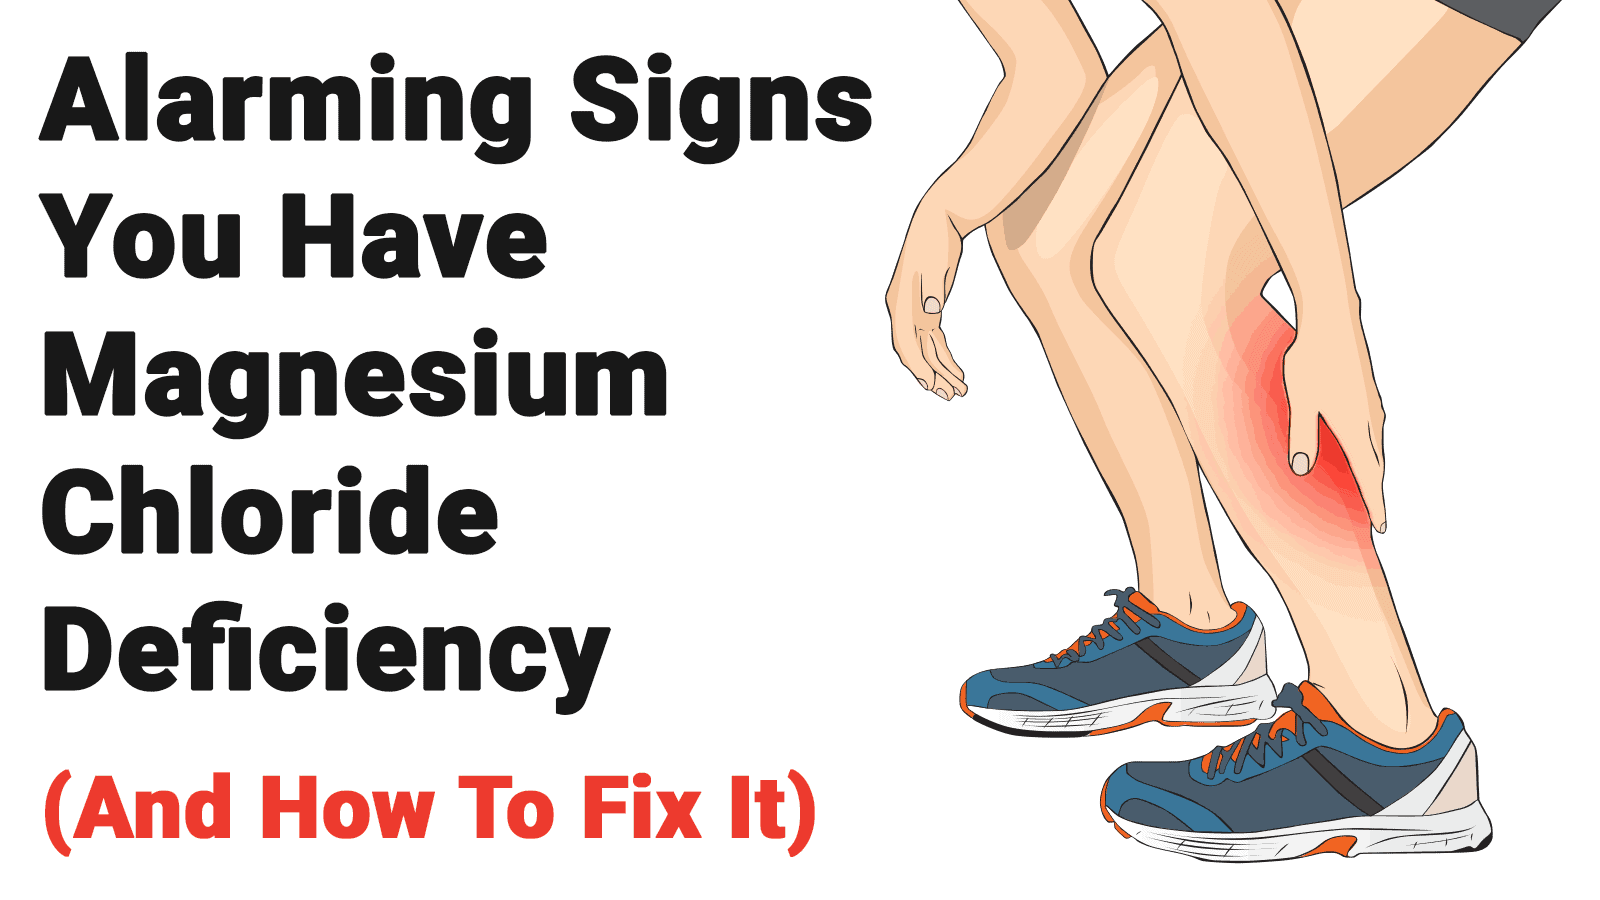 Alarming Signs You Have Magnesium Chloride Deficiency (And How To Fix It)